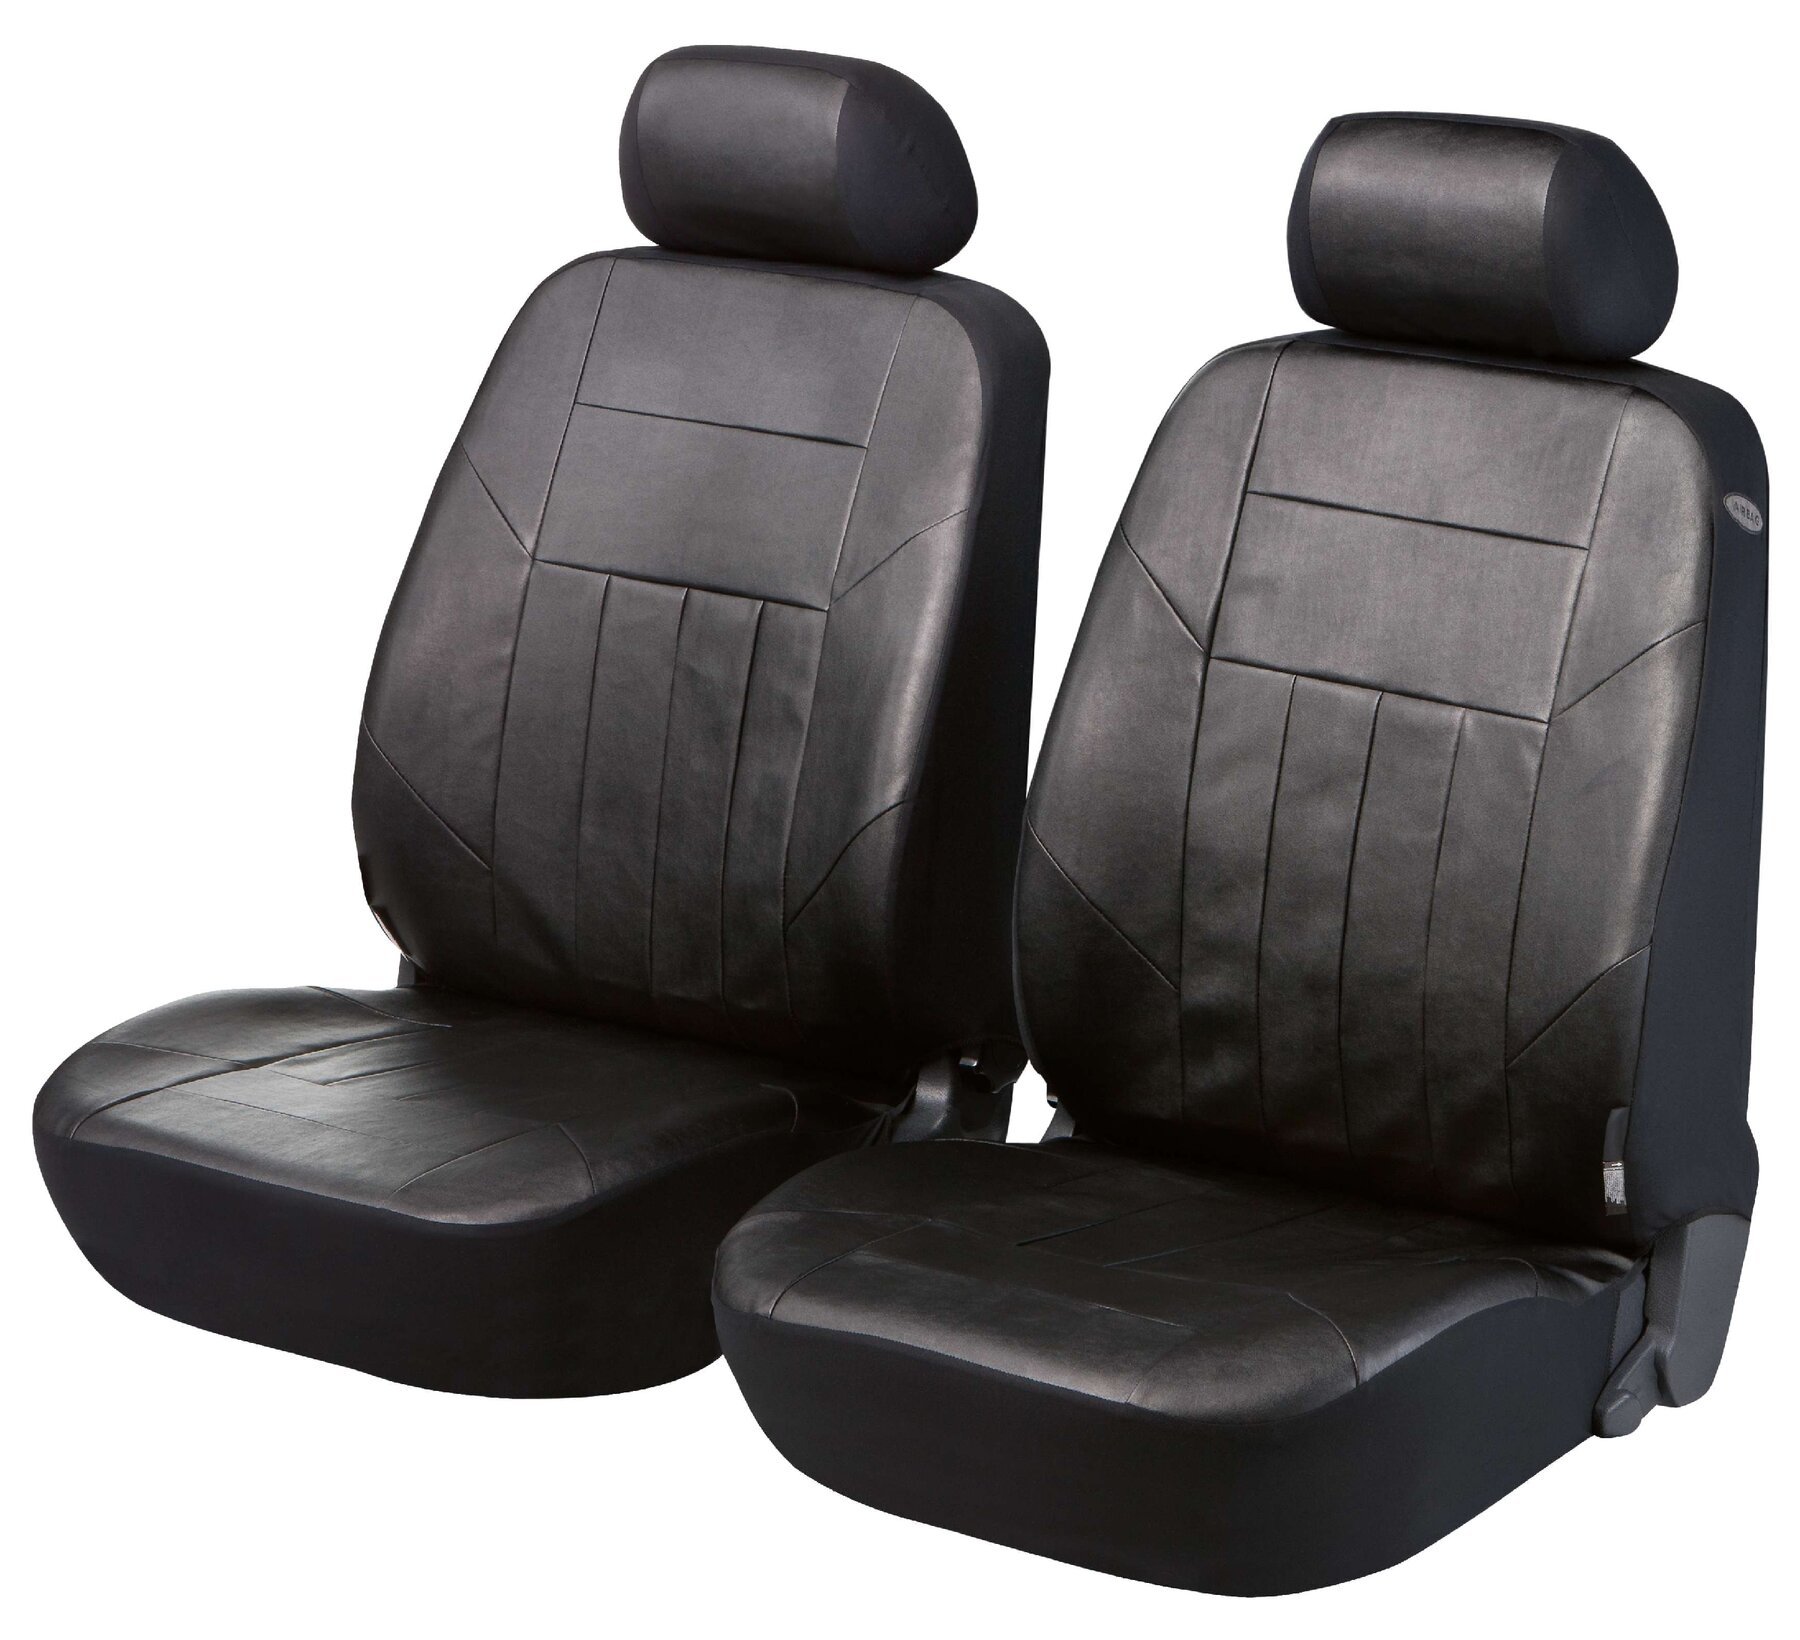 Car Seat cover artificial leather Soft Nappa black for two front seats